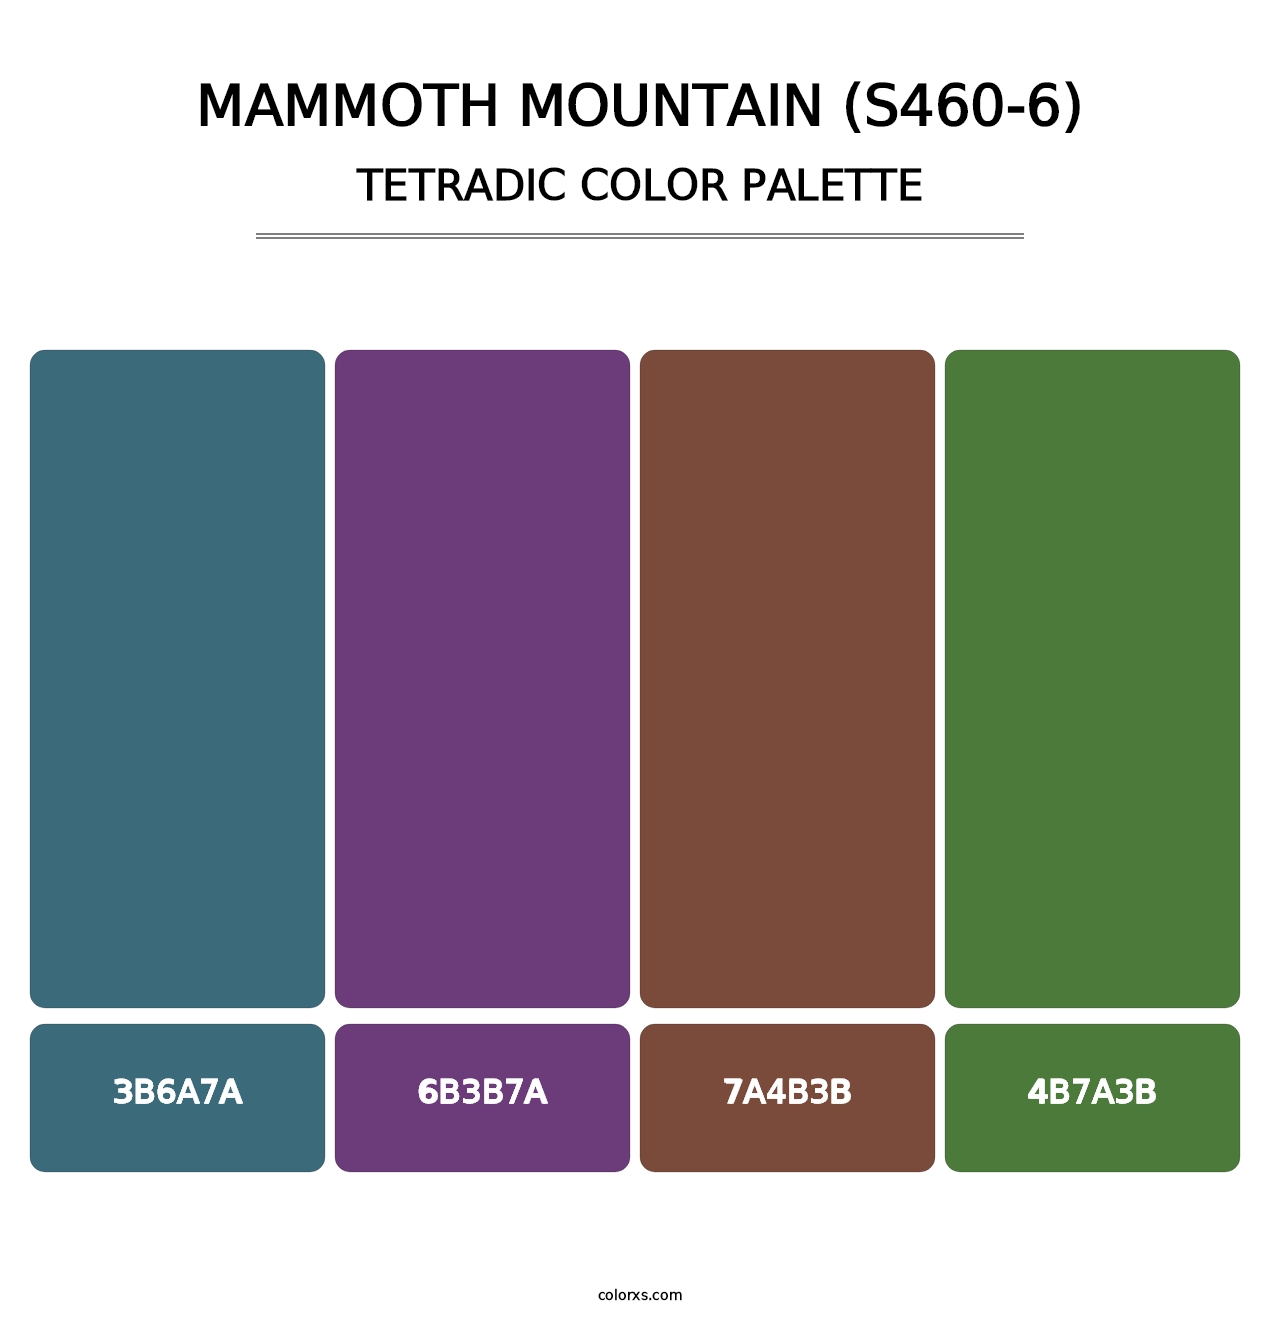 Mammoth Mountain (S460-6) - Tetradic Color Palette